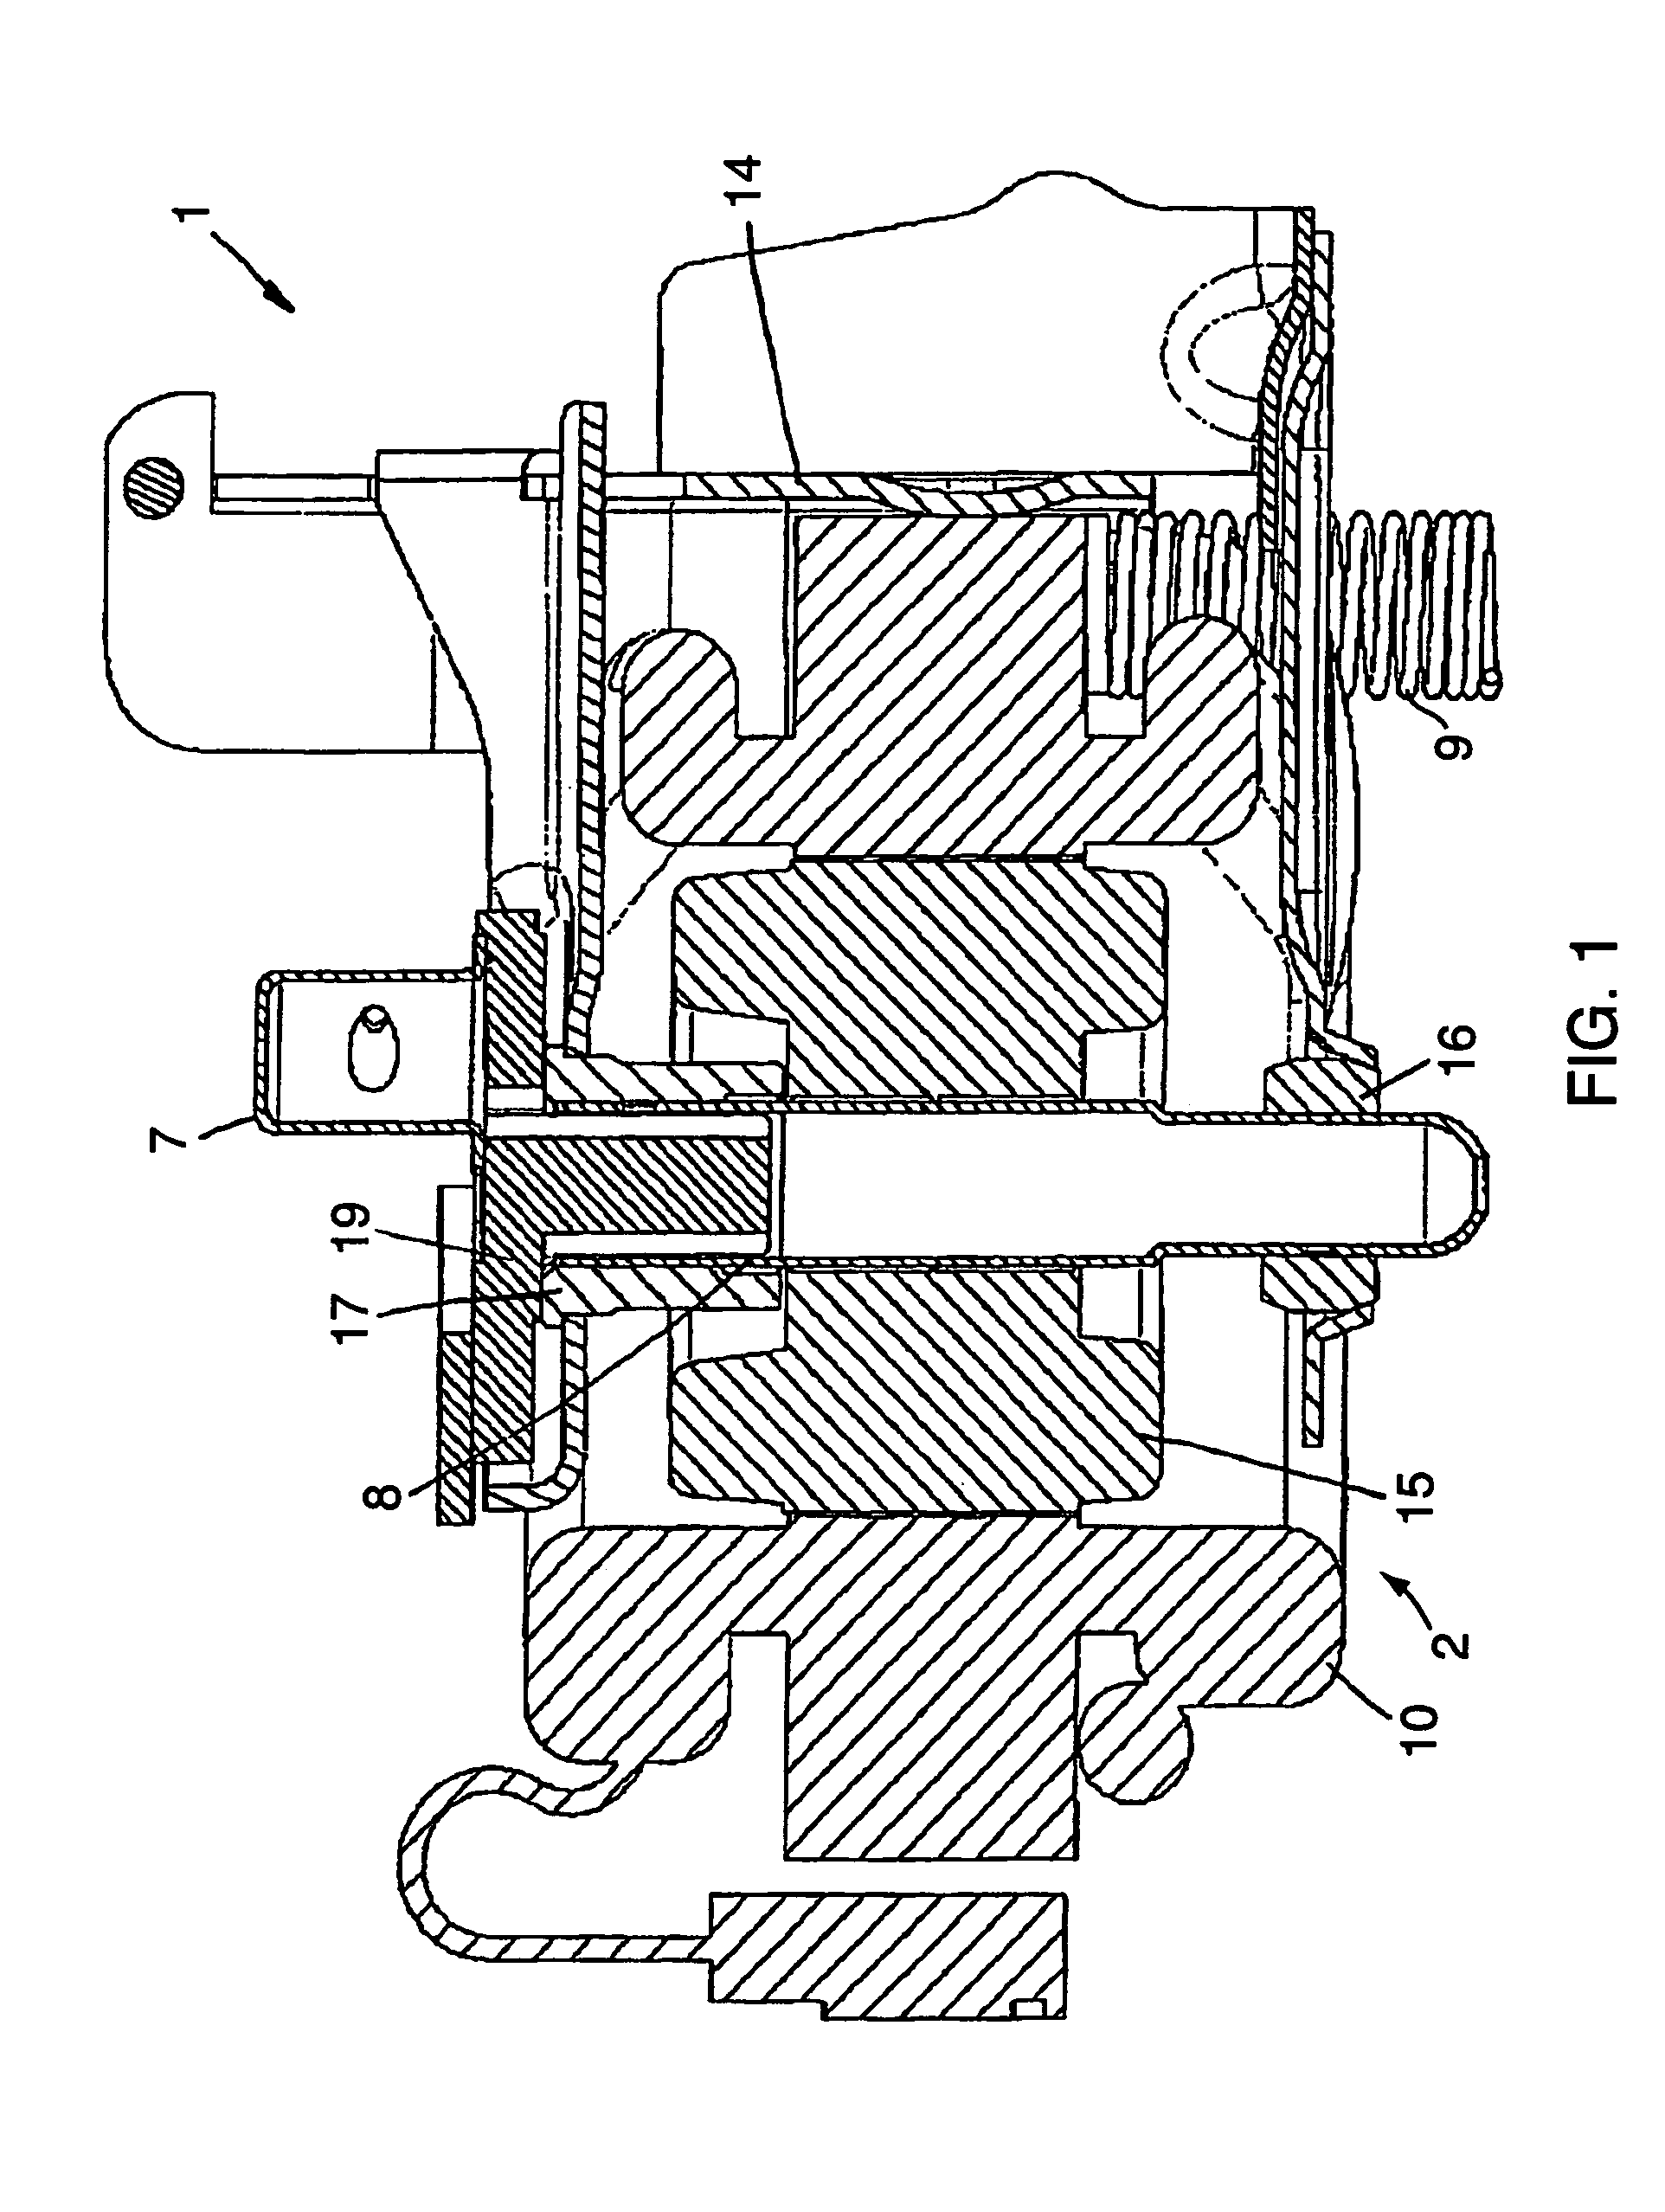 Rotor arrangement for an electrical drive motor of a compressor, particularly a refrigerant compressor